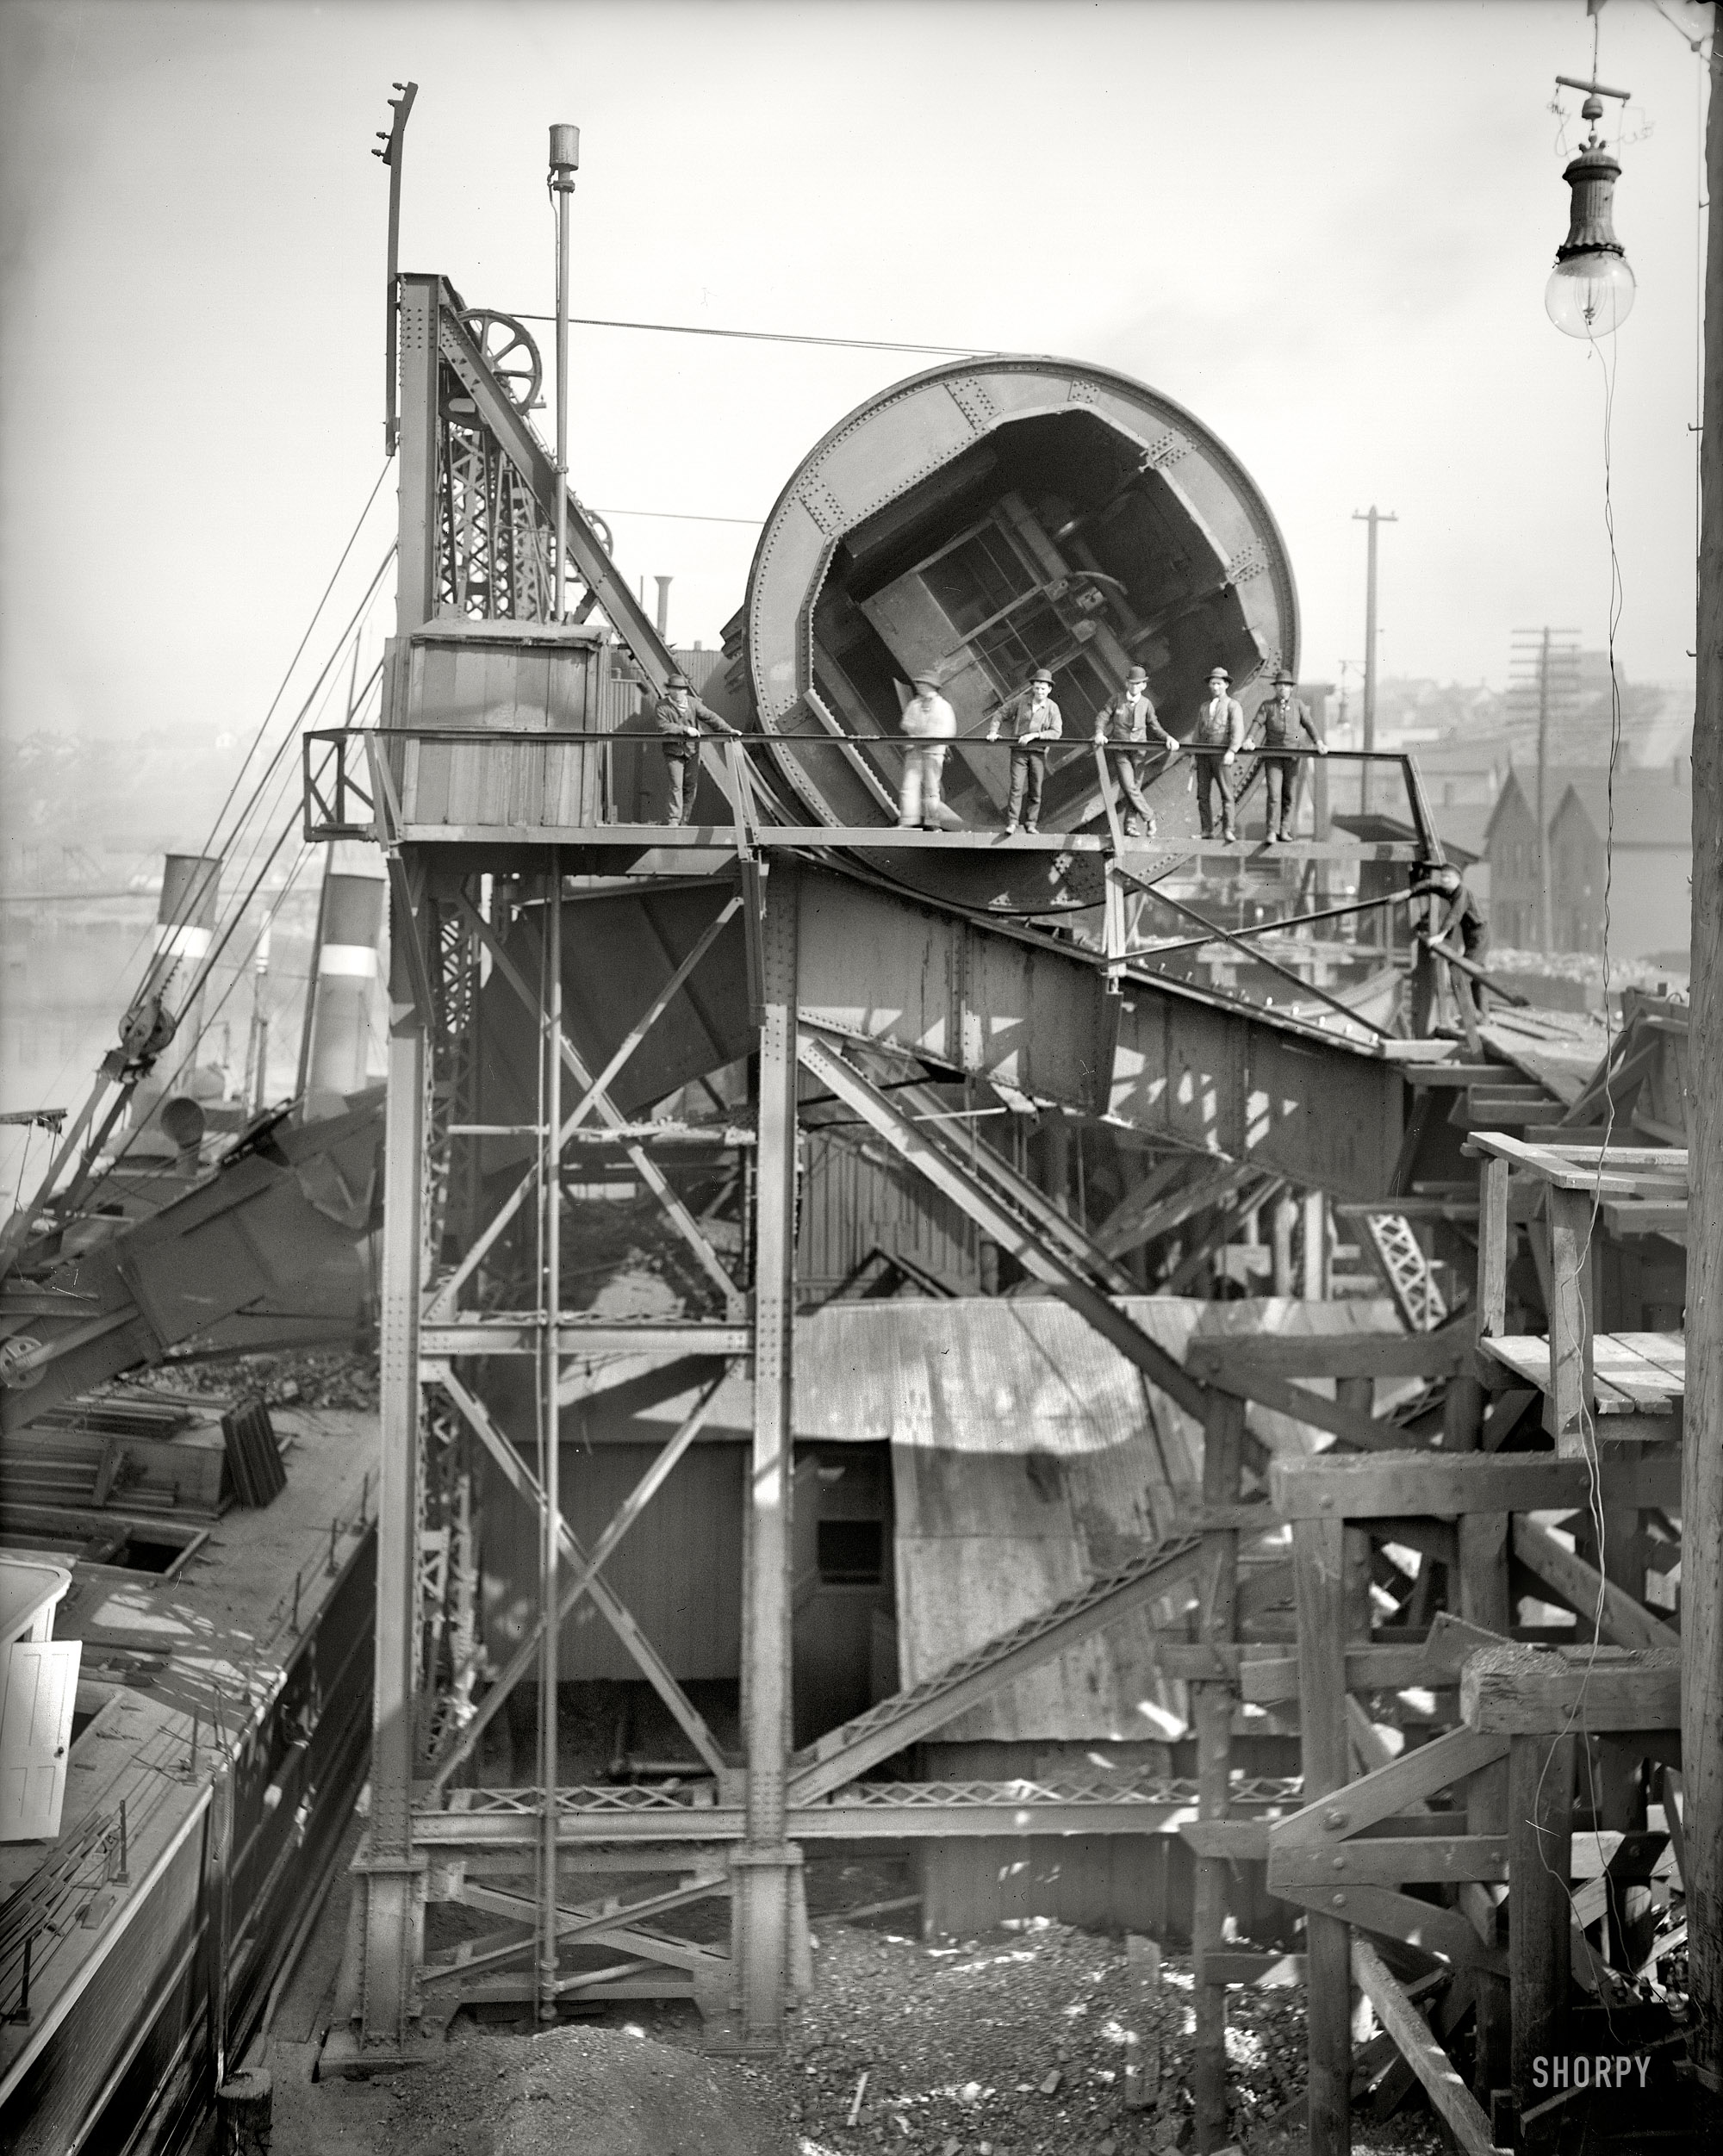 Cleveland, Ohio, circa 1910. "Rotary coal car unloader." Don't try this at home. 8x10 inch dry plate glass negative, Detroit Publishing Company. View full size.